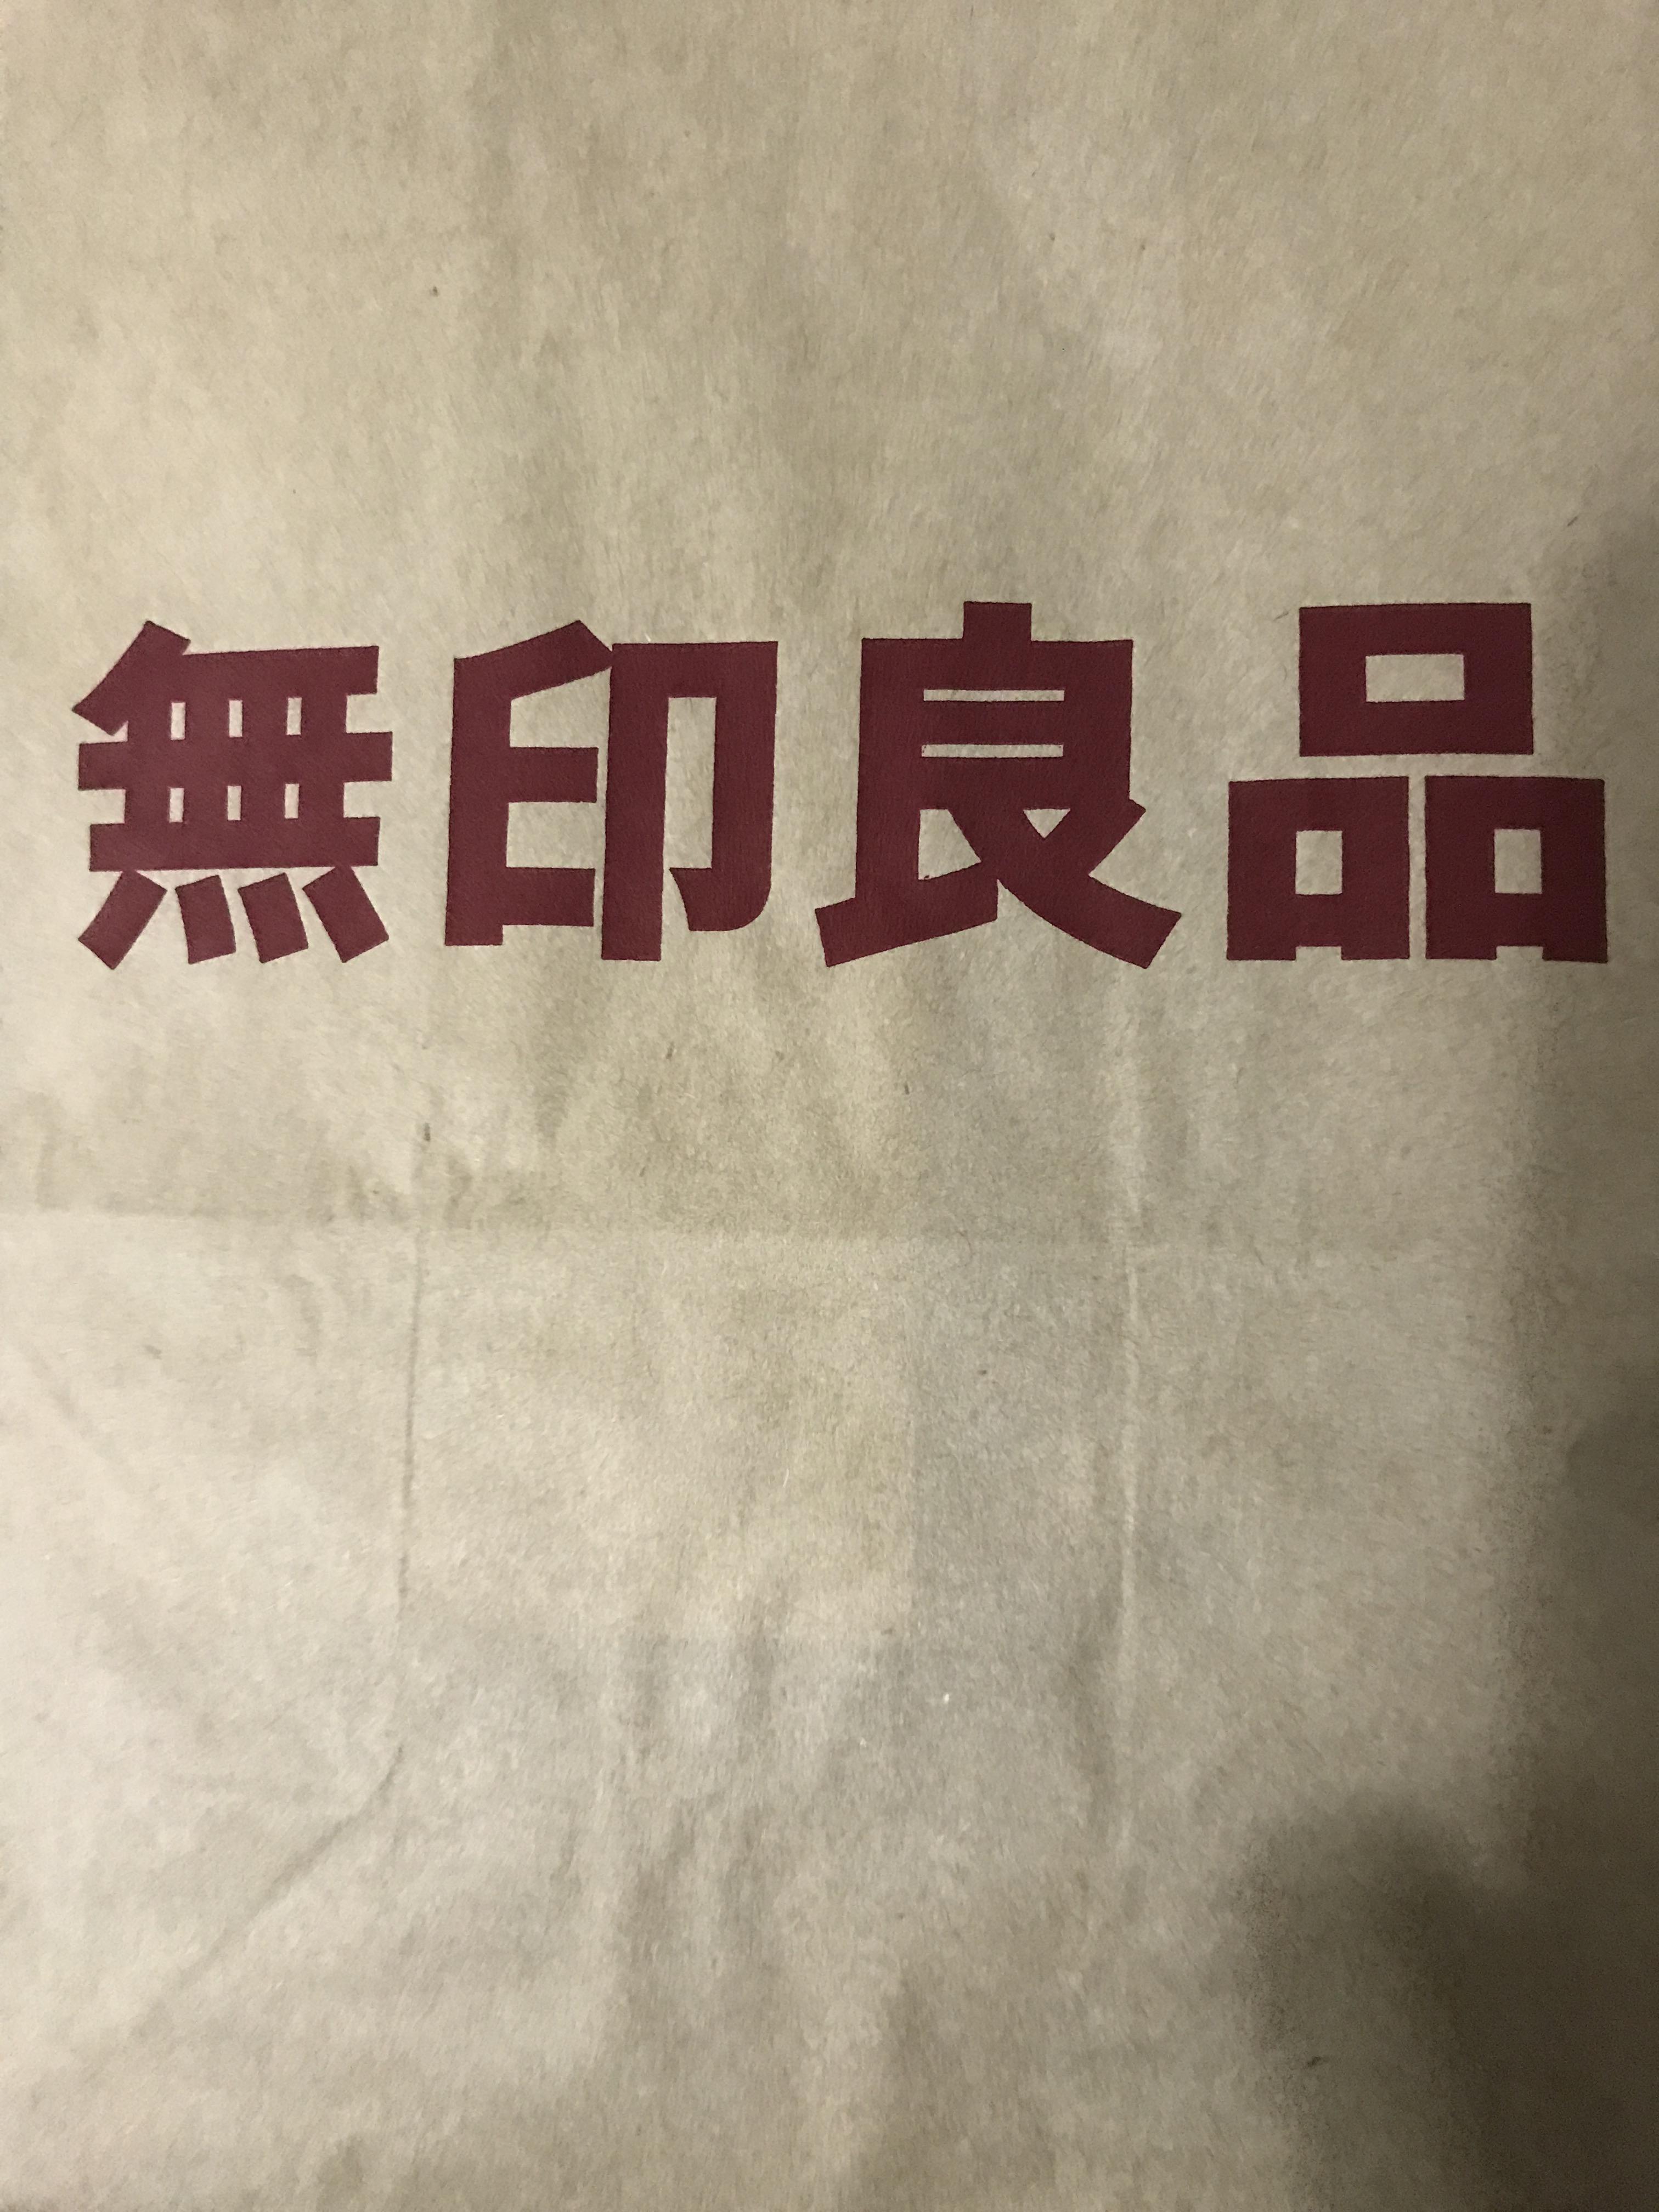 What does the characters in the muji logo mean in Cantonese.